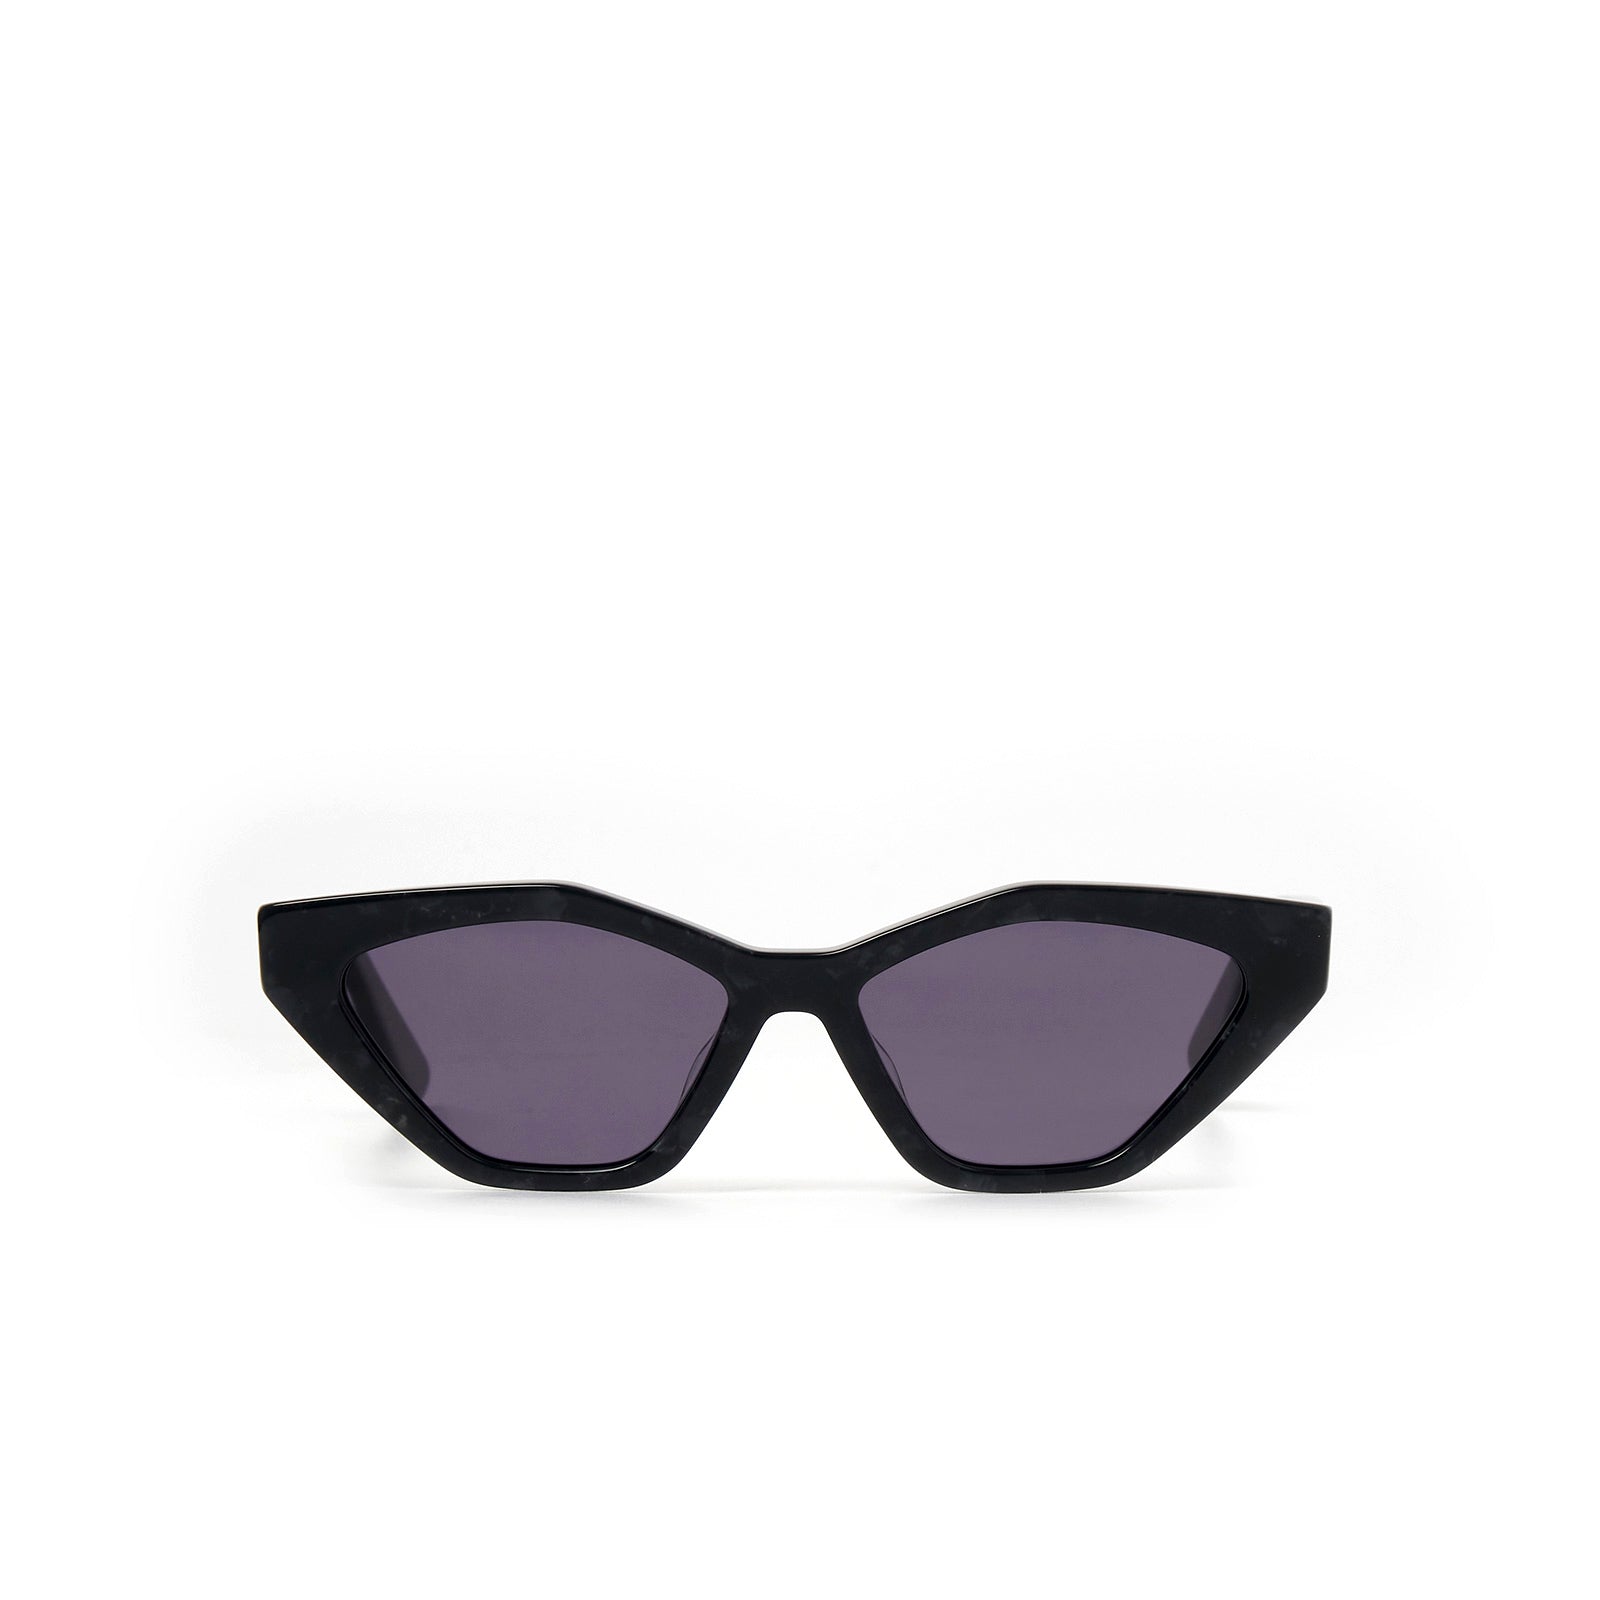 Women’s Jagger Sunglasses - Grey Arms of Eve